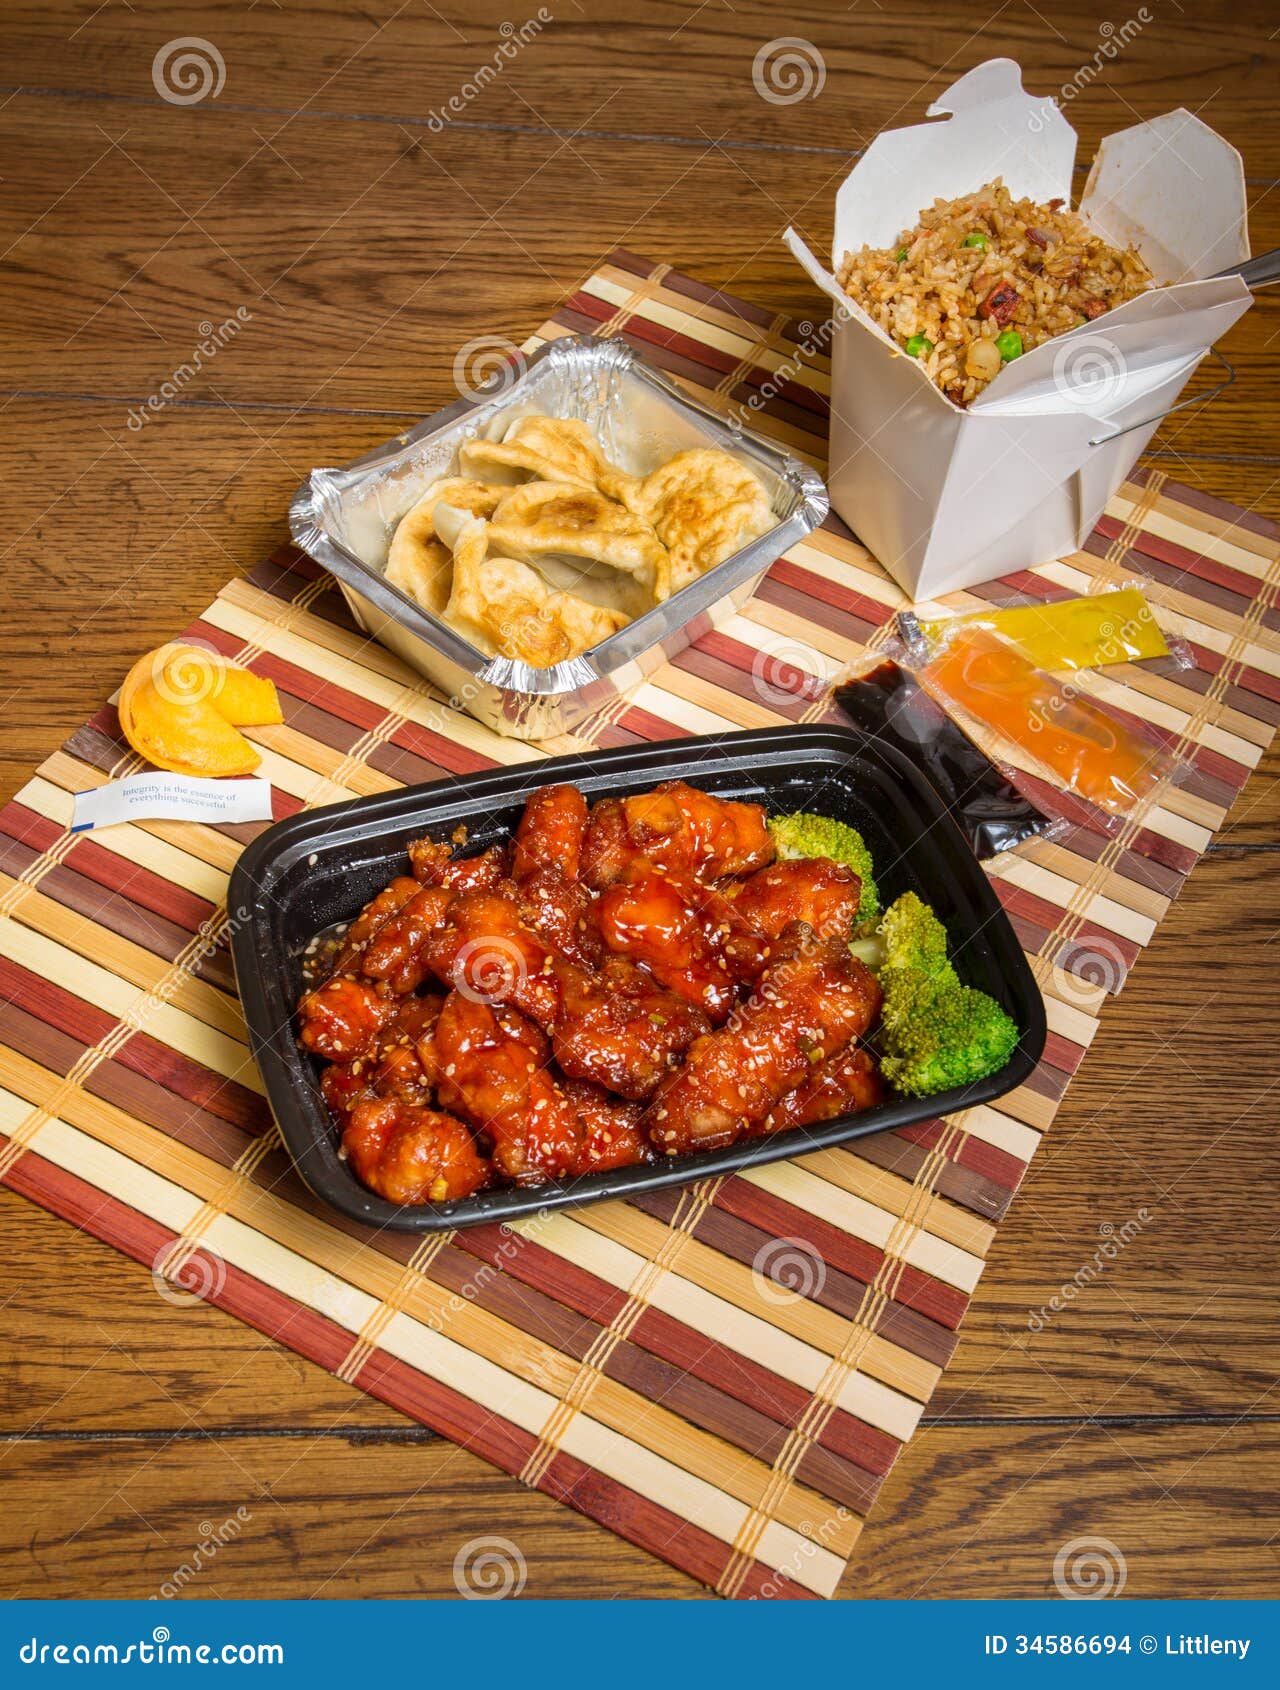 chinese-takeout-take-out-sesame-chicken-meal-34586694.jpg